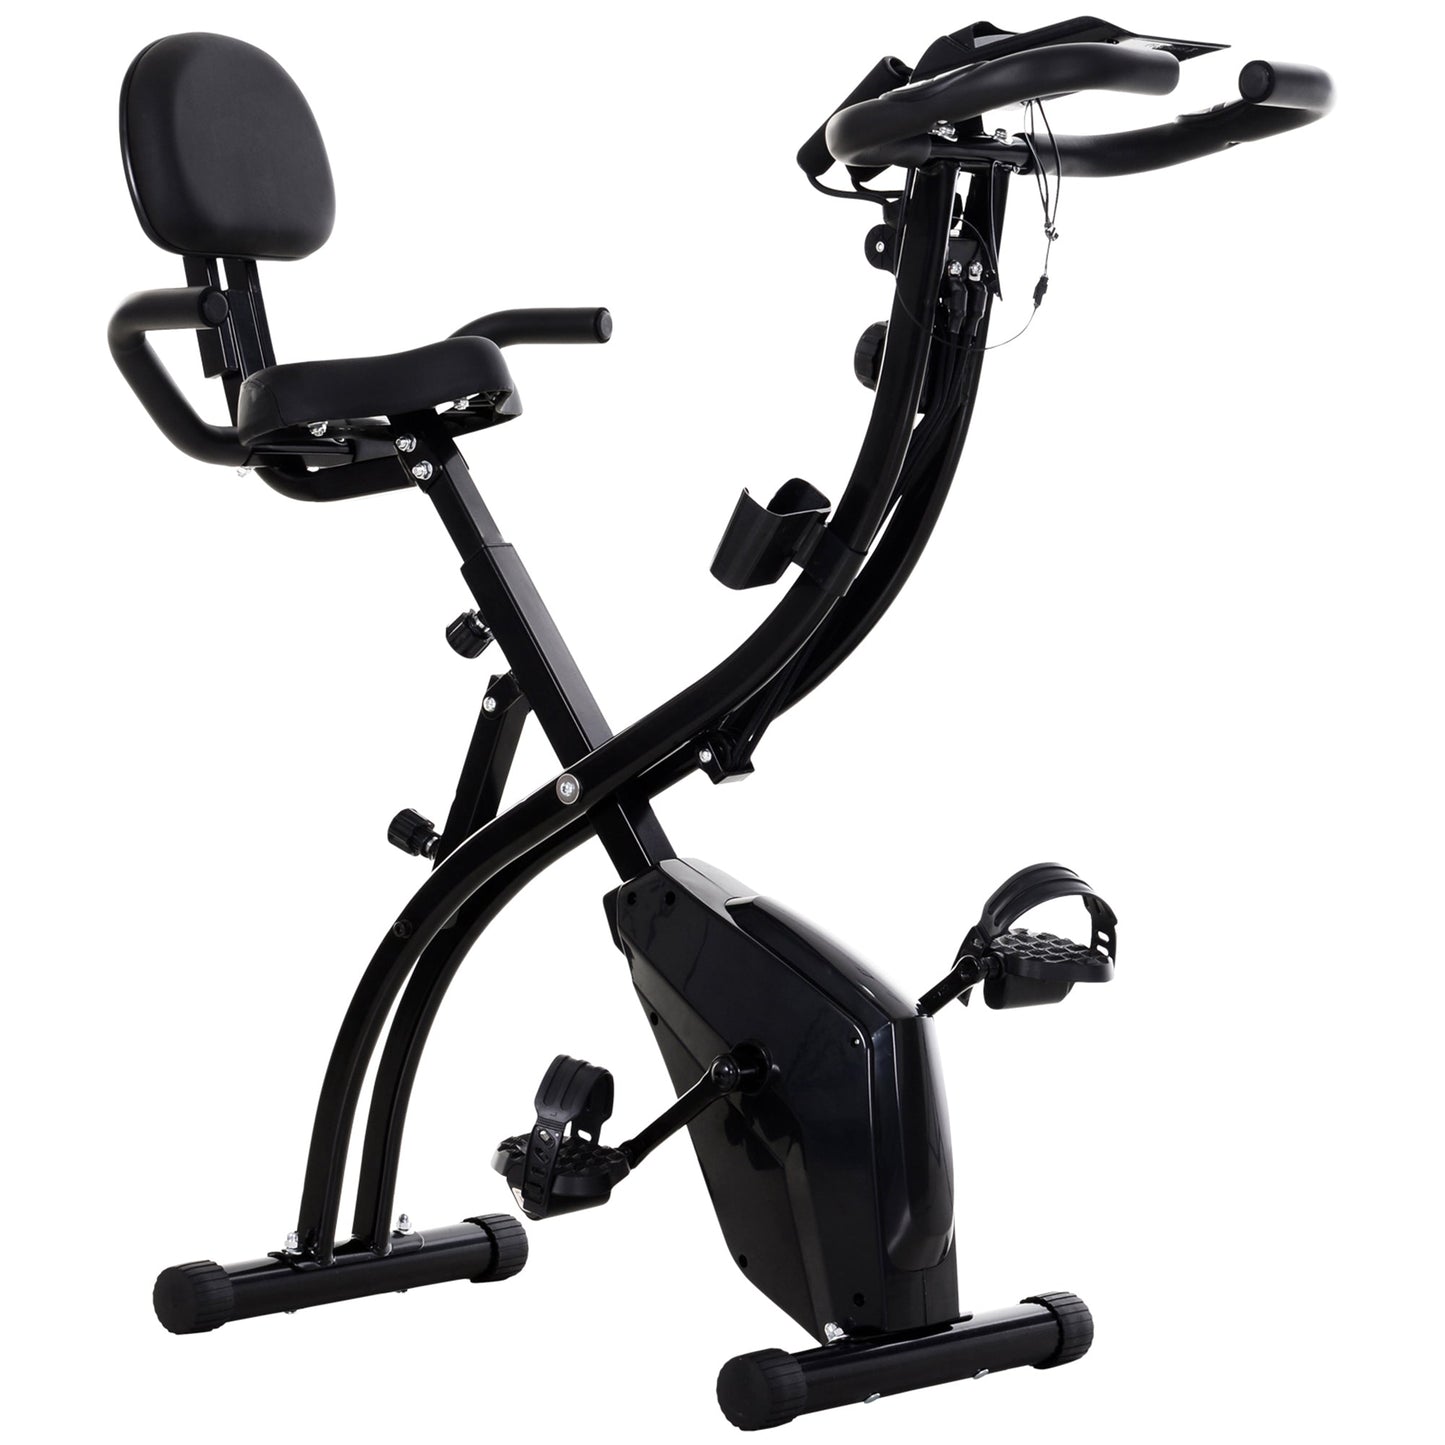 2 in 1 Upright Exercise Bike Stationary Foldable Magnetic Recumbent Cycling with Arm Resistance Bands Black at Gallery Canada